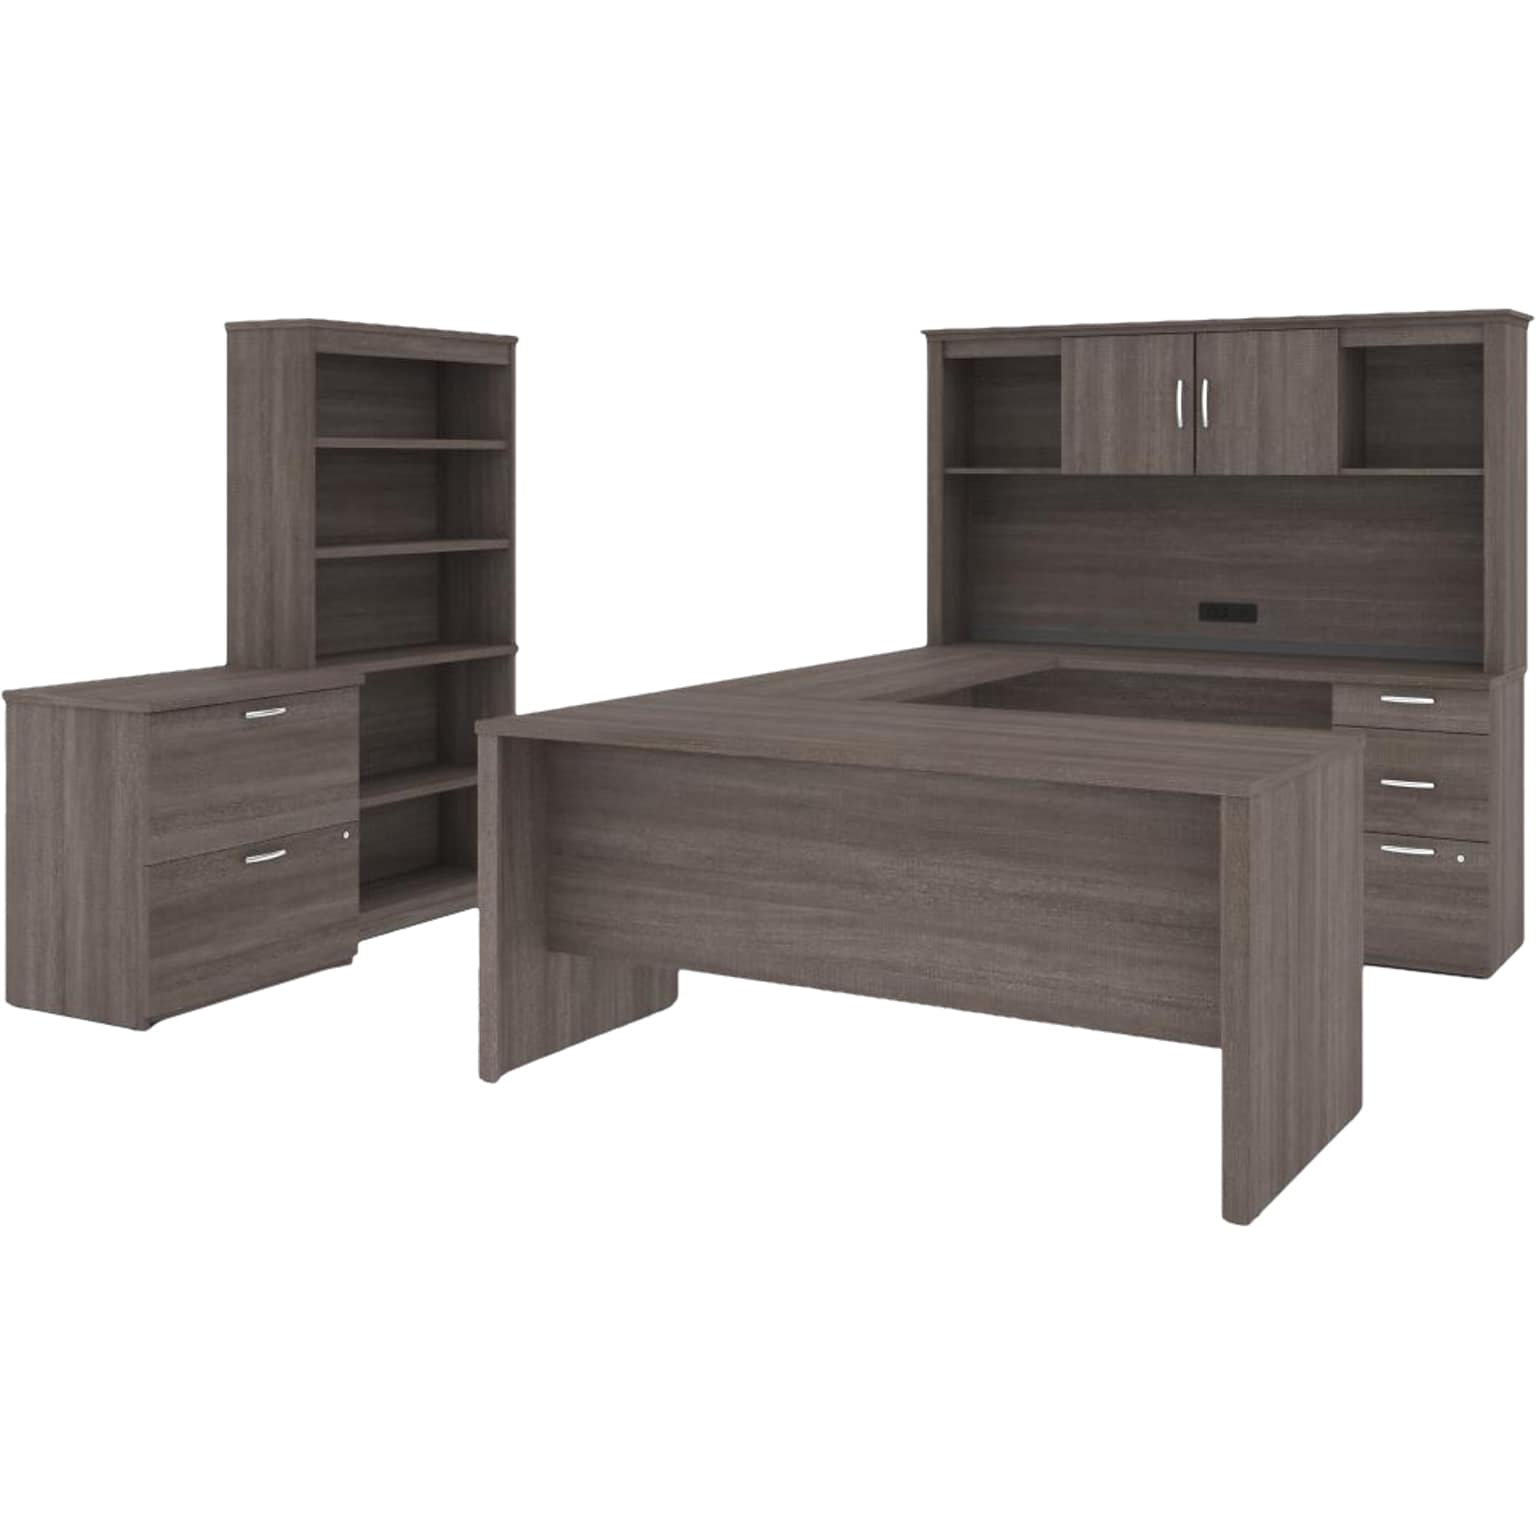 Bestar Logan 66 U-Shaped Executive Desk with Hutch, Lateral File Cabinet, and Bookcase, Bark Grey (46851-47)